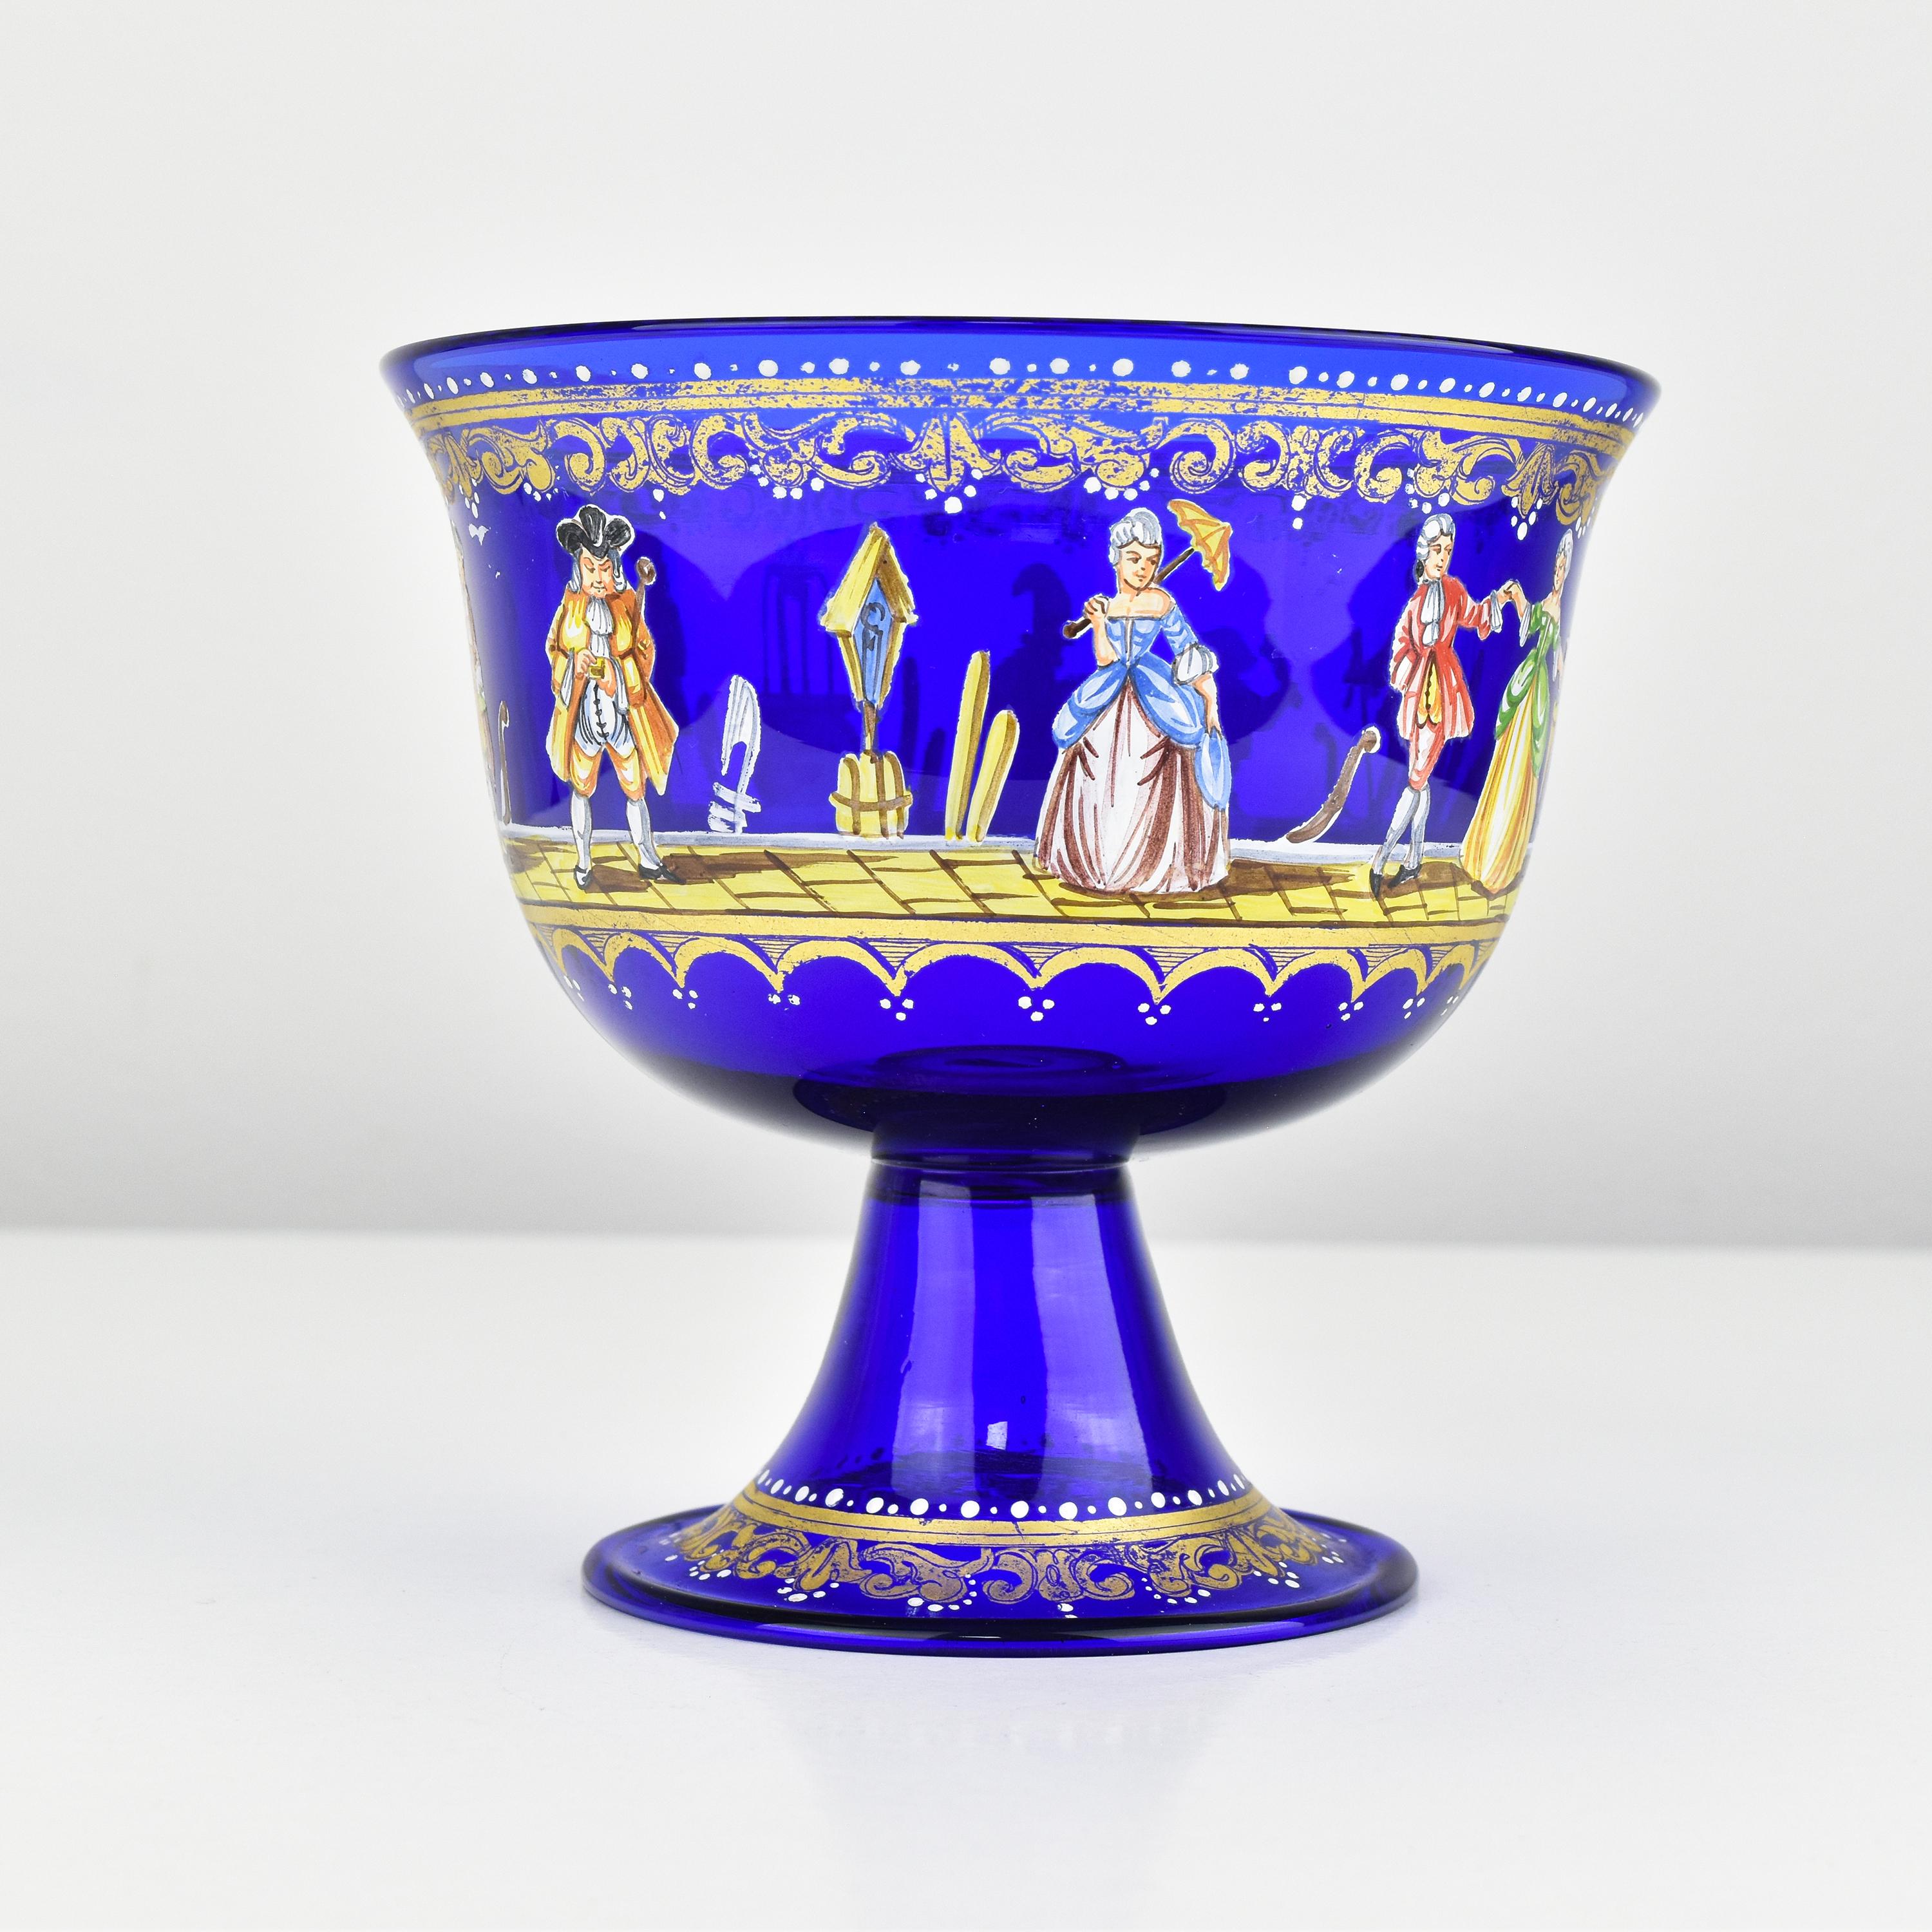 Antique or Vintage Wedding Cup - Rare Murano Glass in Royal Blue

This wedding cup Grand Tour reproduction, made from cobalt blue glass with polychrome enamel and gilded accents, is a fascinating piece. 

It was crafted by Barovier & Toso in Murano